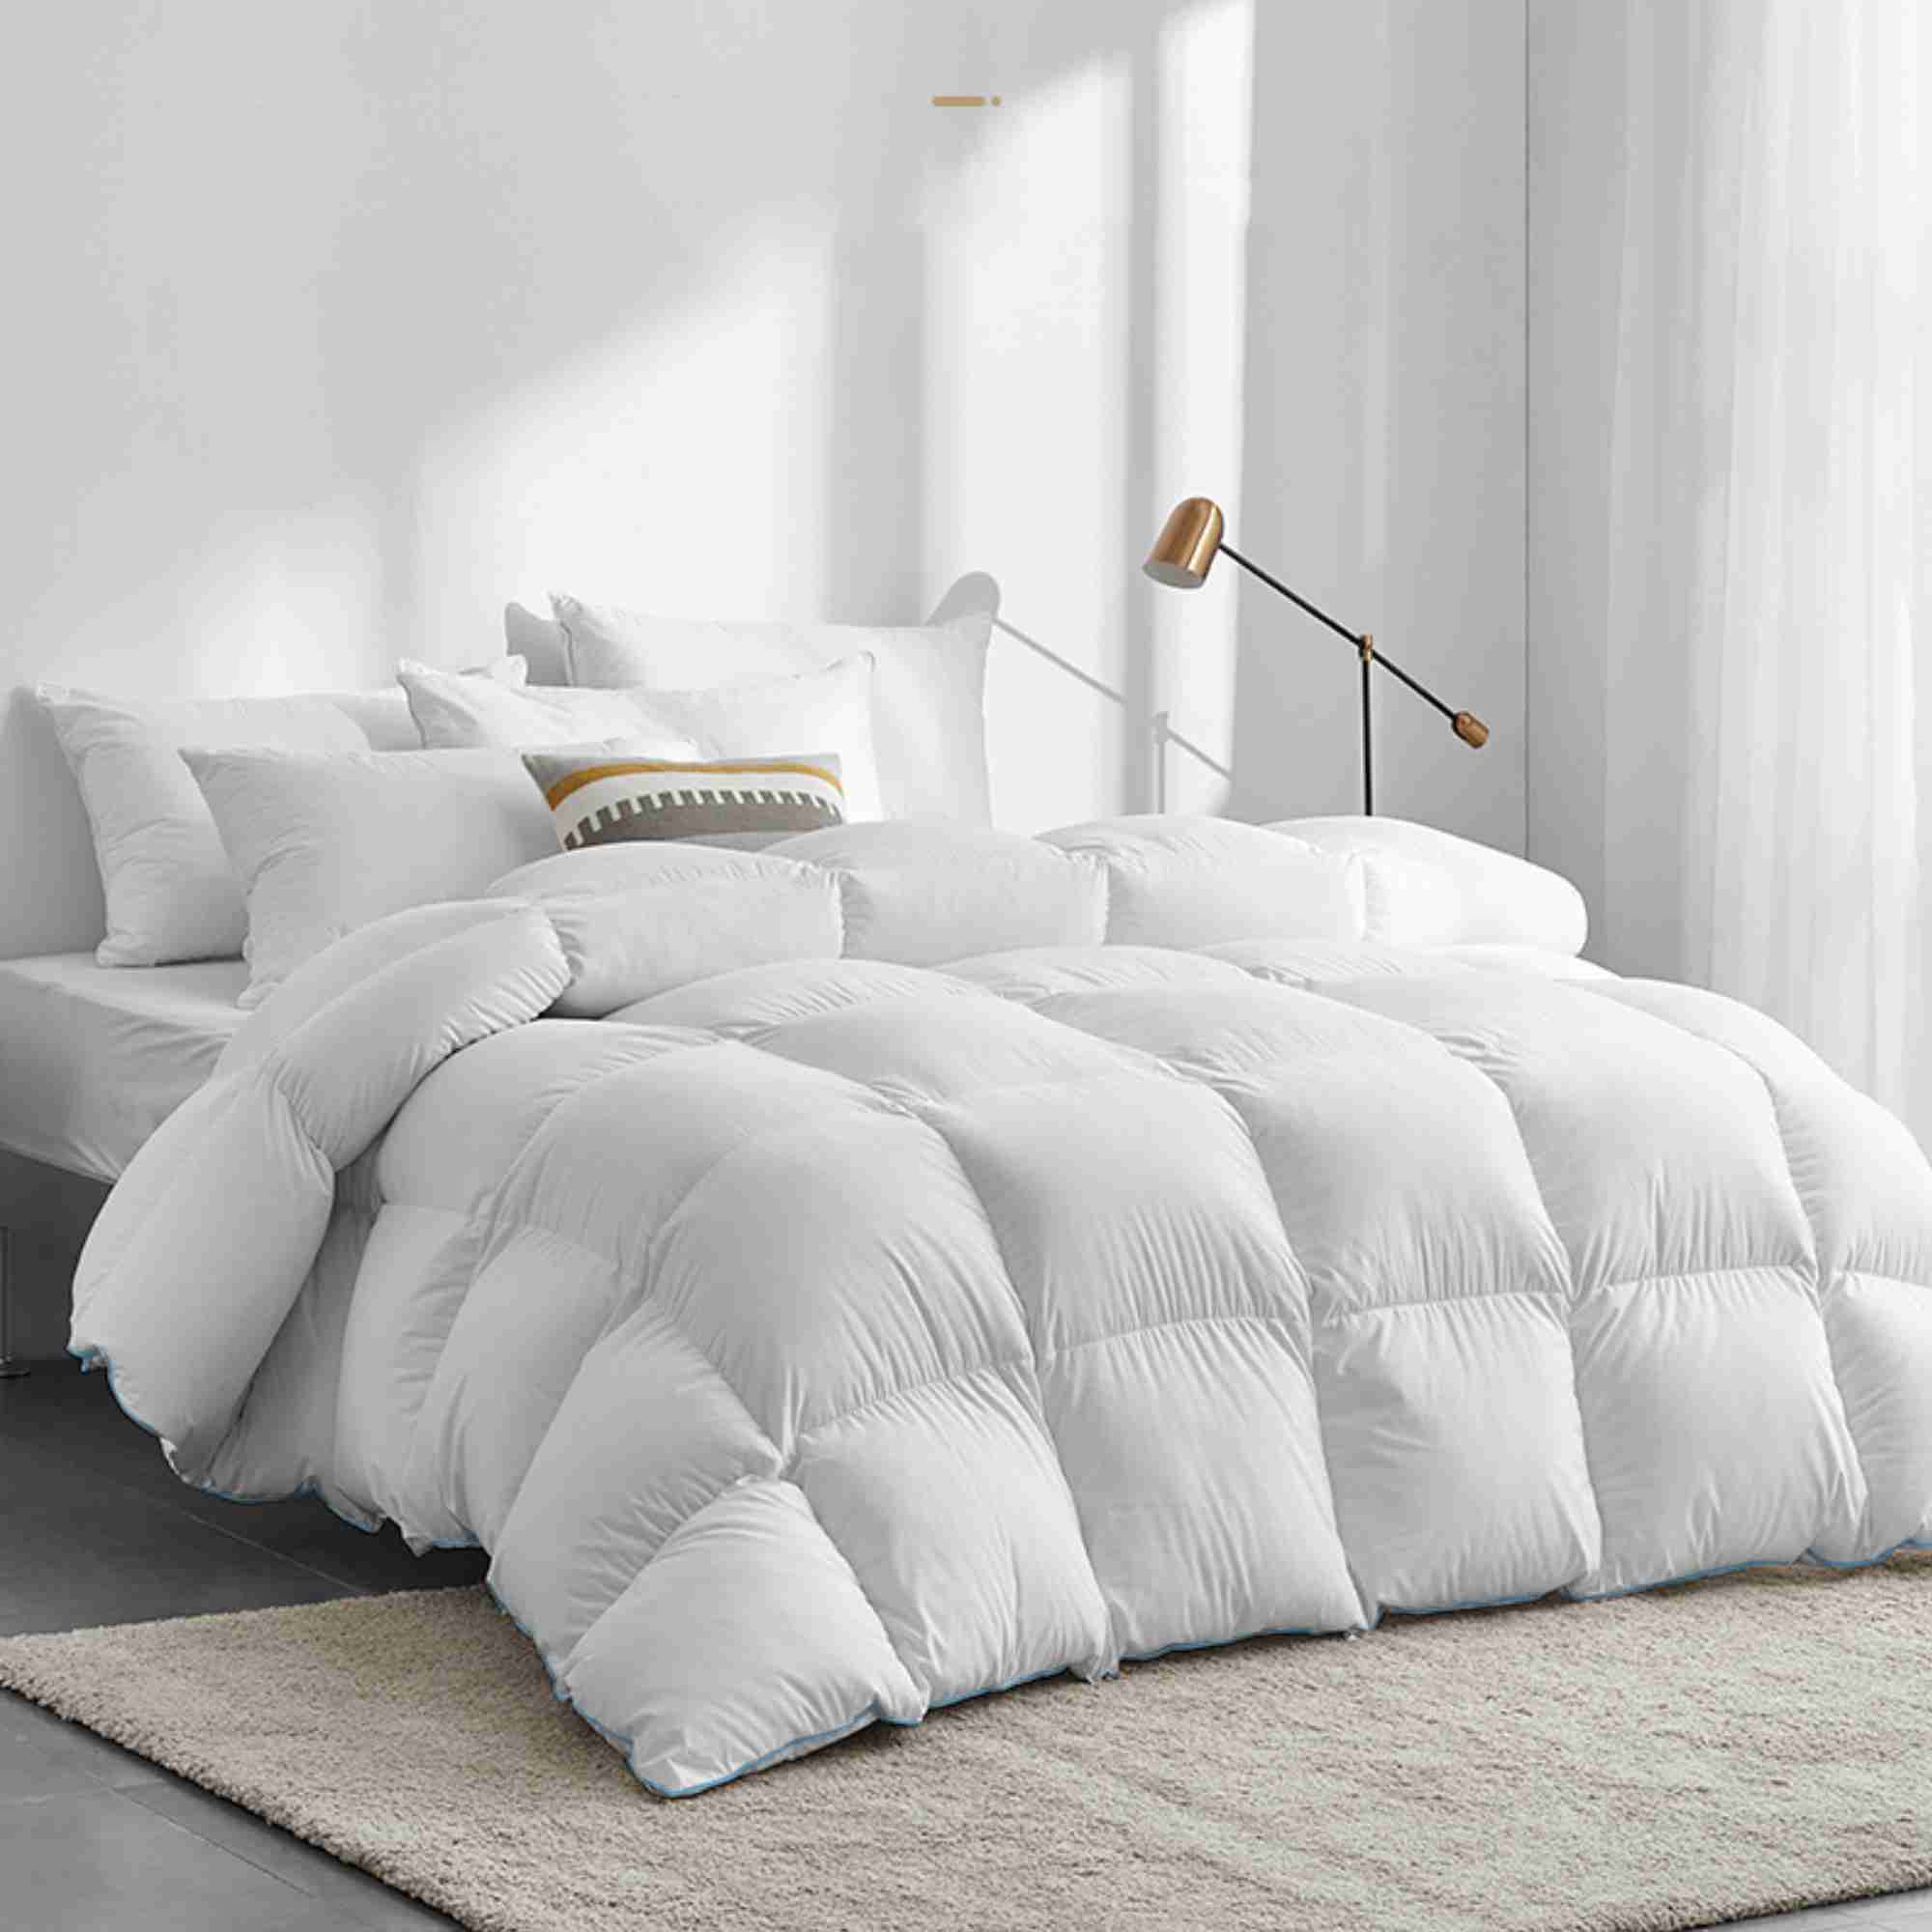 goose-down-comforter-twin-size-hotel-collection for cheap